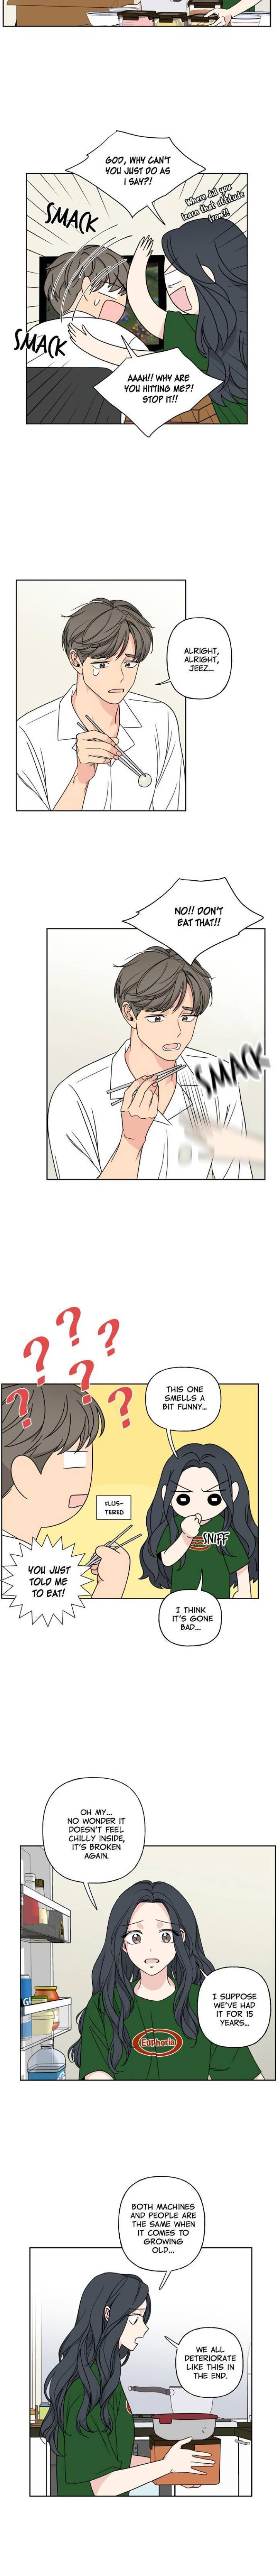 mother-im-sorry-chap-22-8